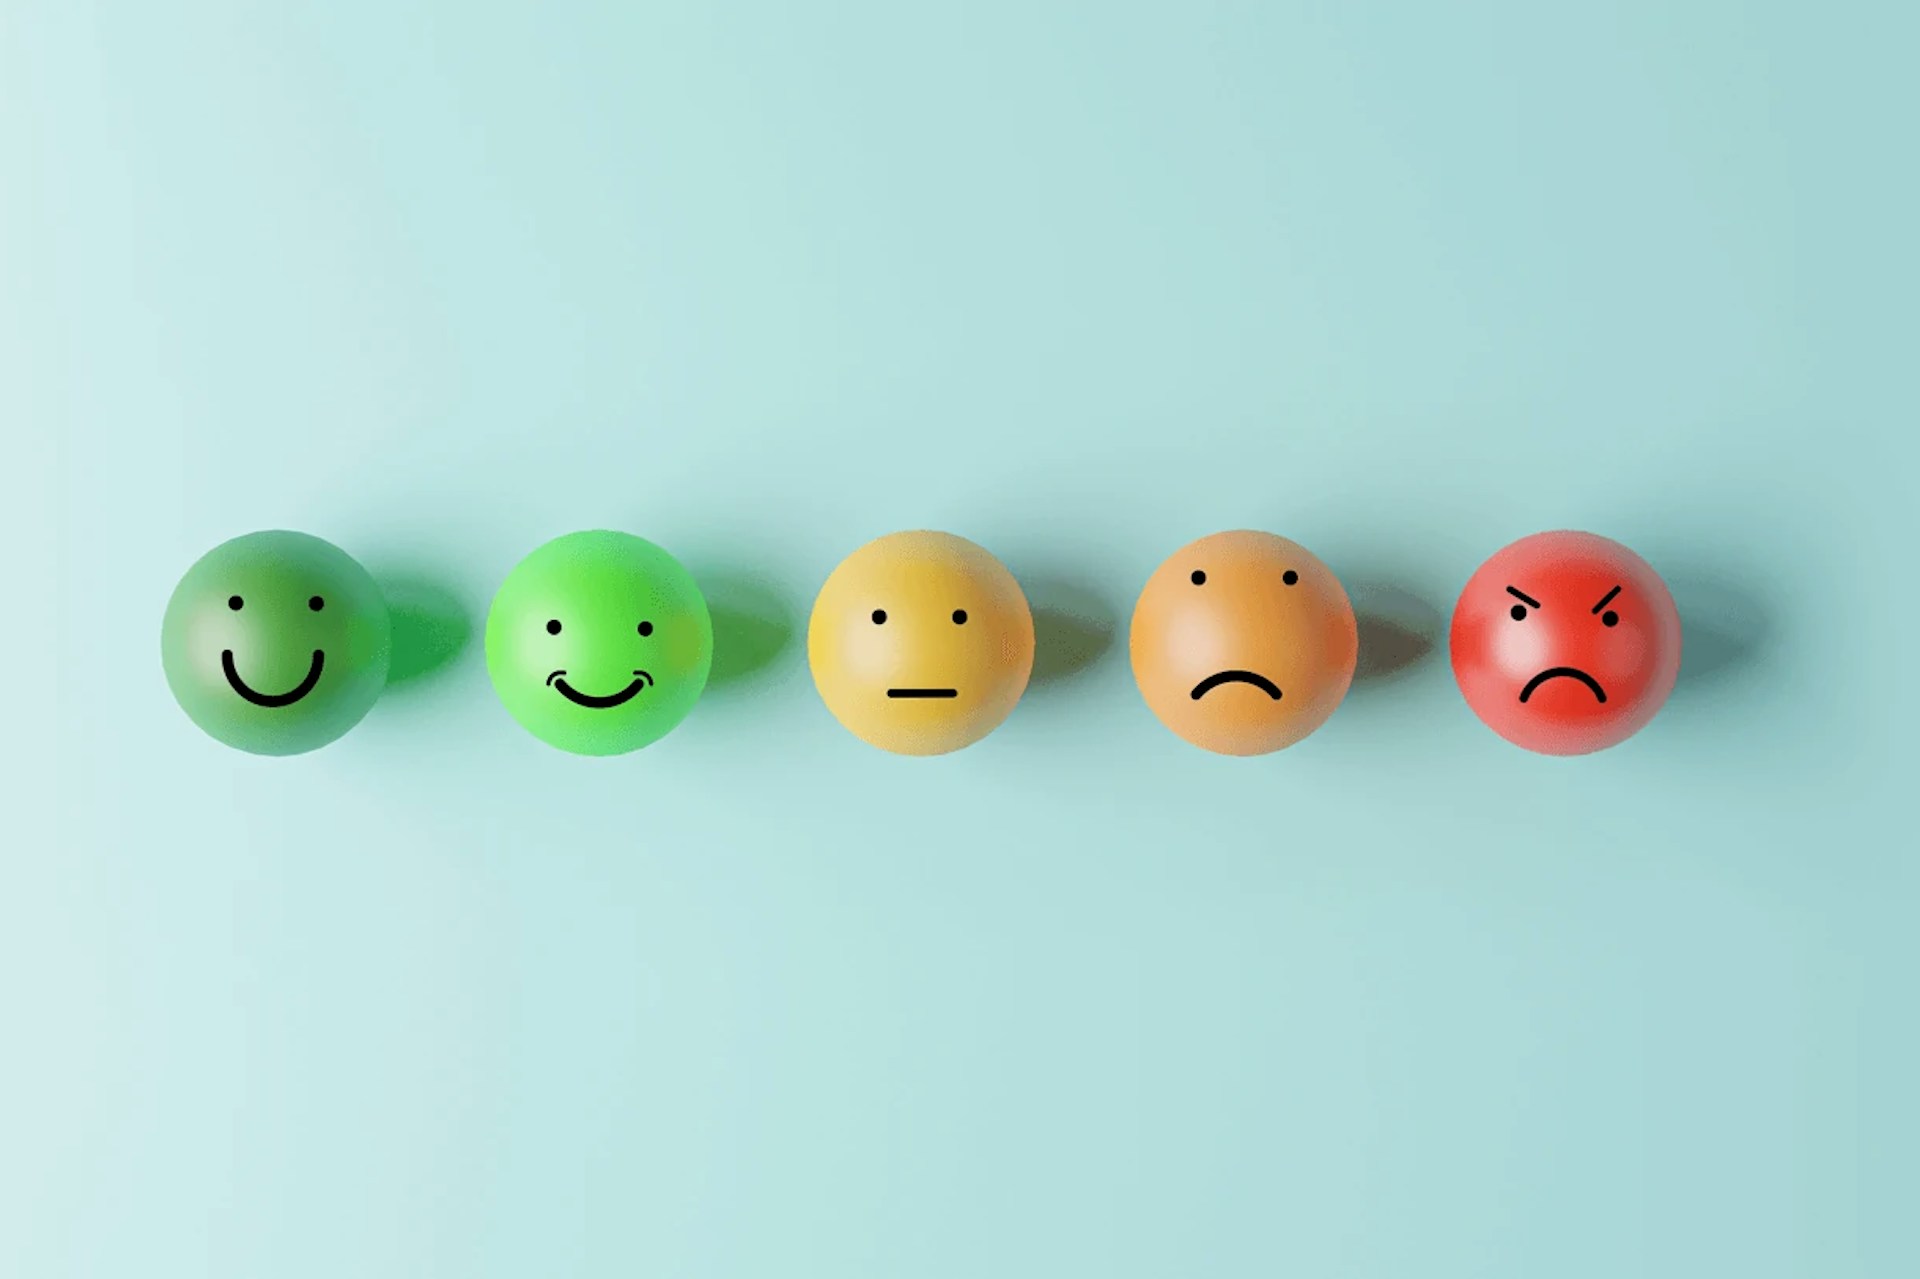 Smileys for measuring customer experience